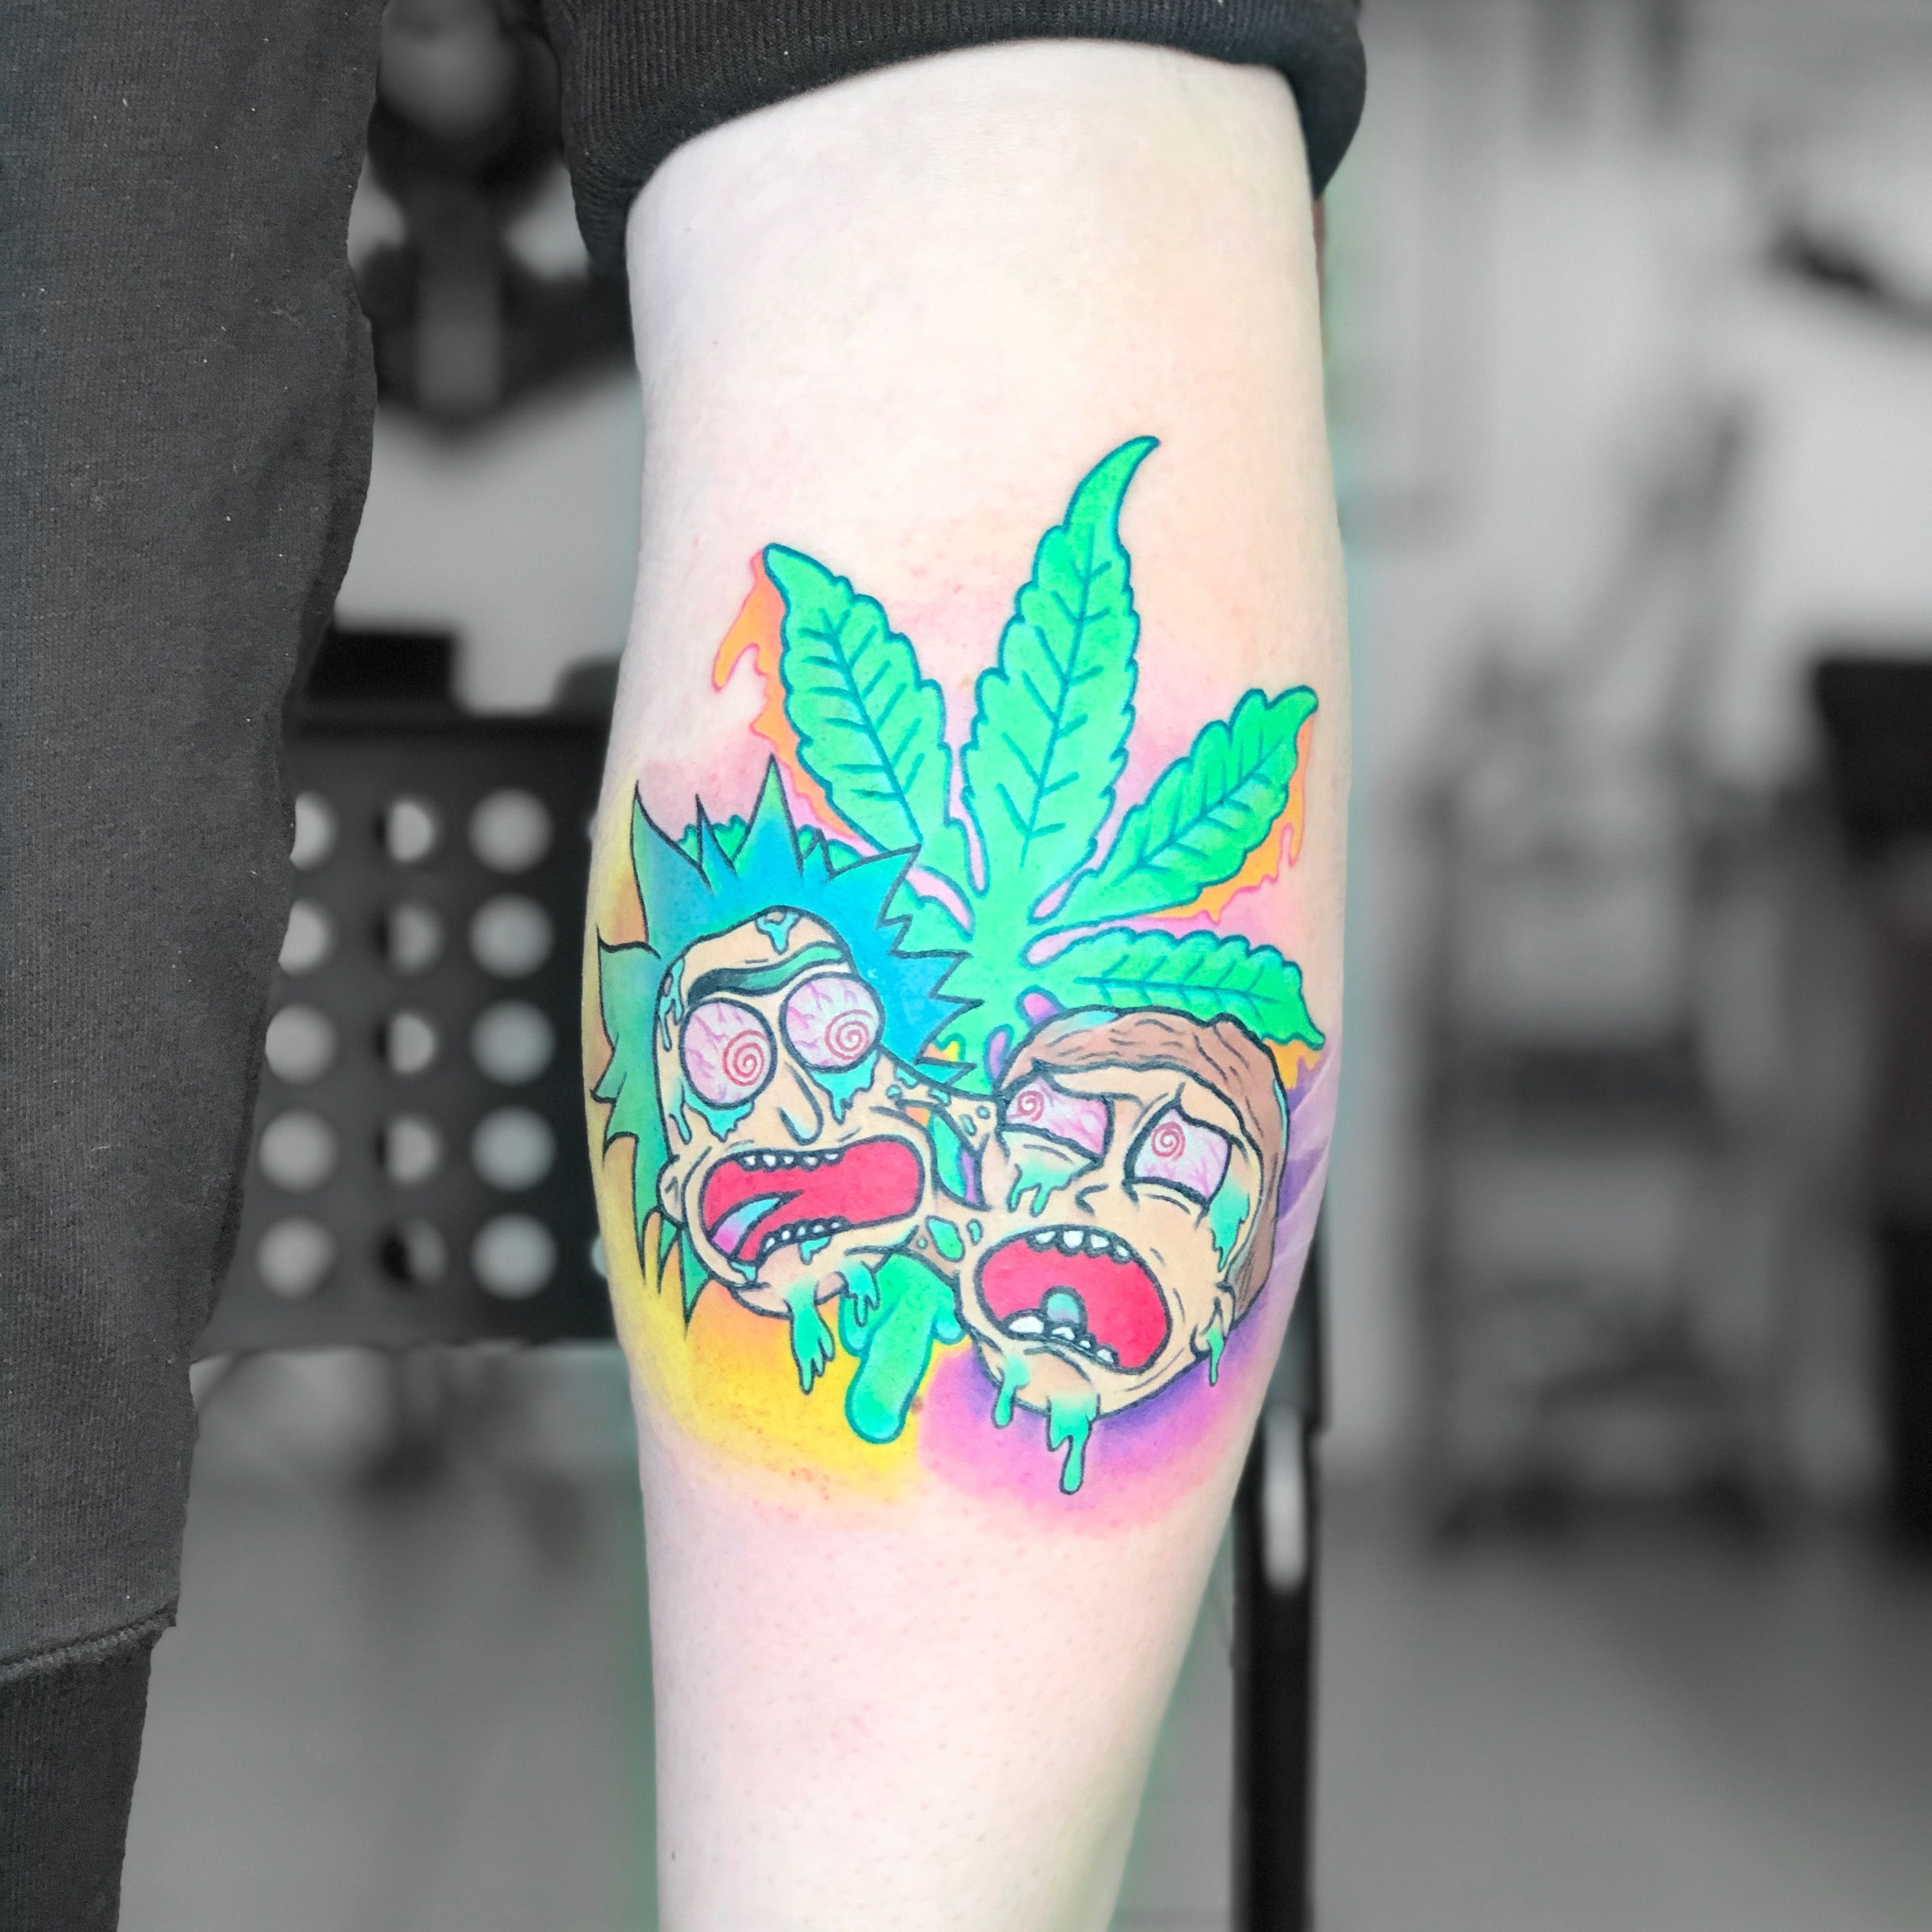 Rick and Morty tattoo on the thigh